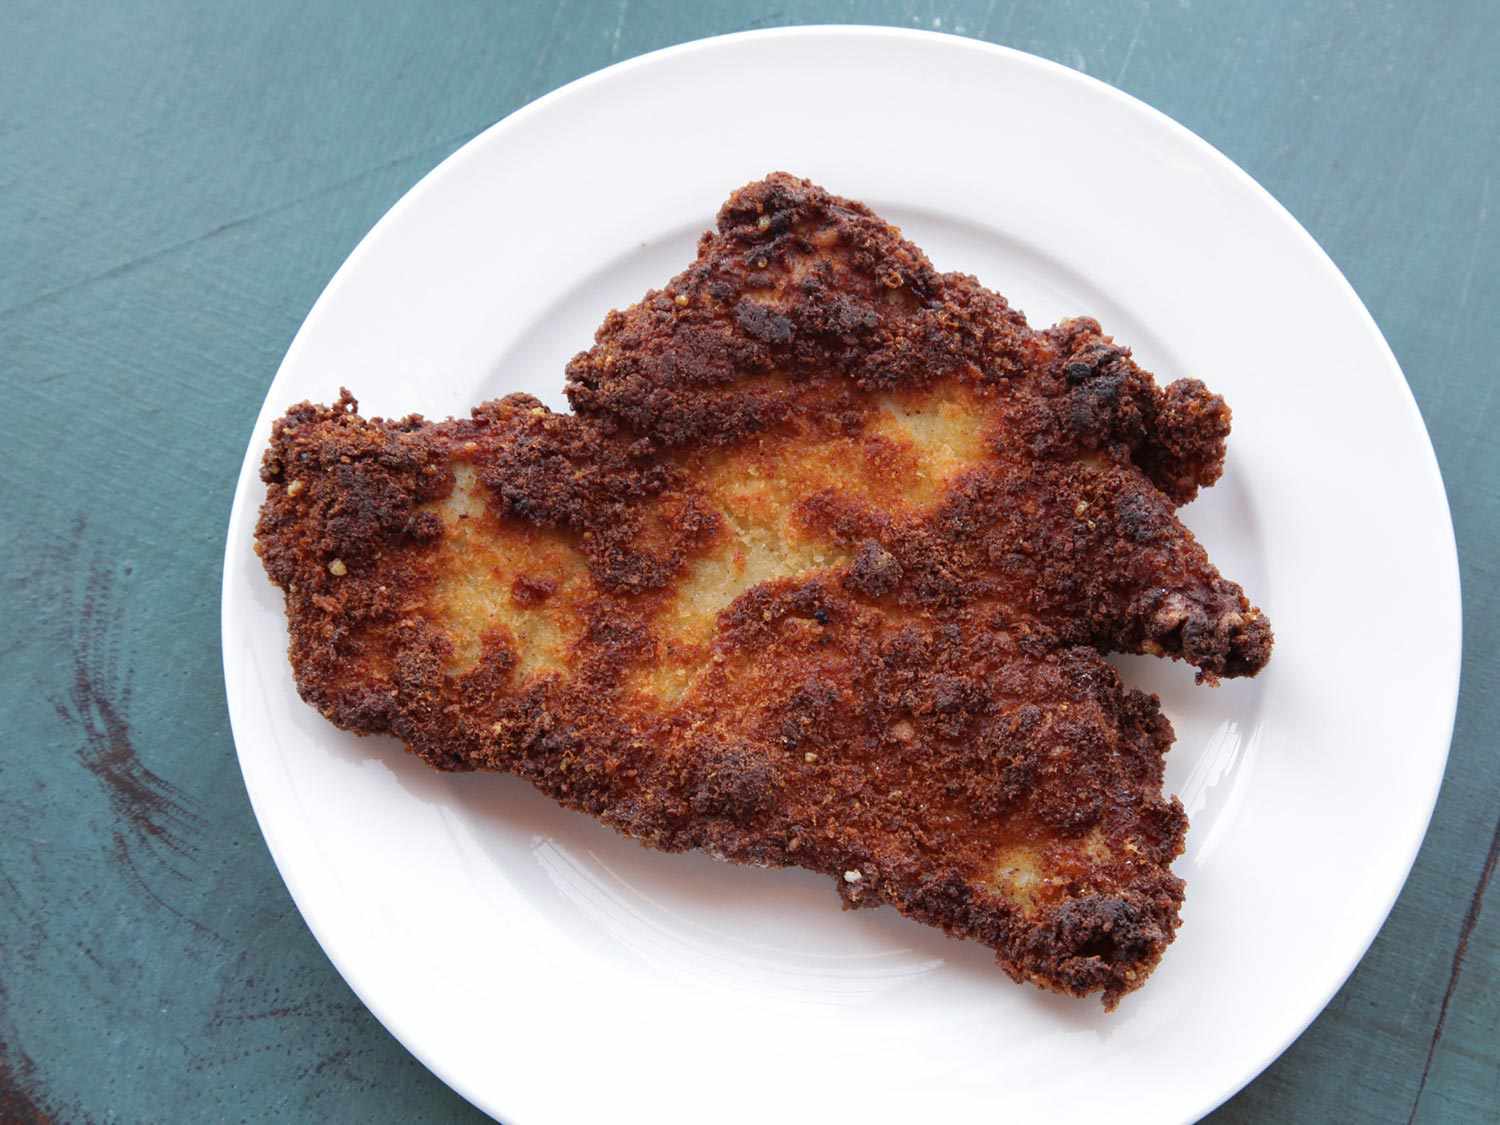 Breaded chicken breast with bits of burnt crust